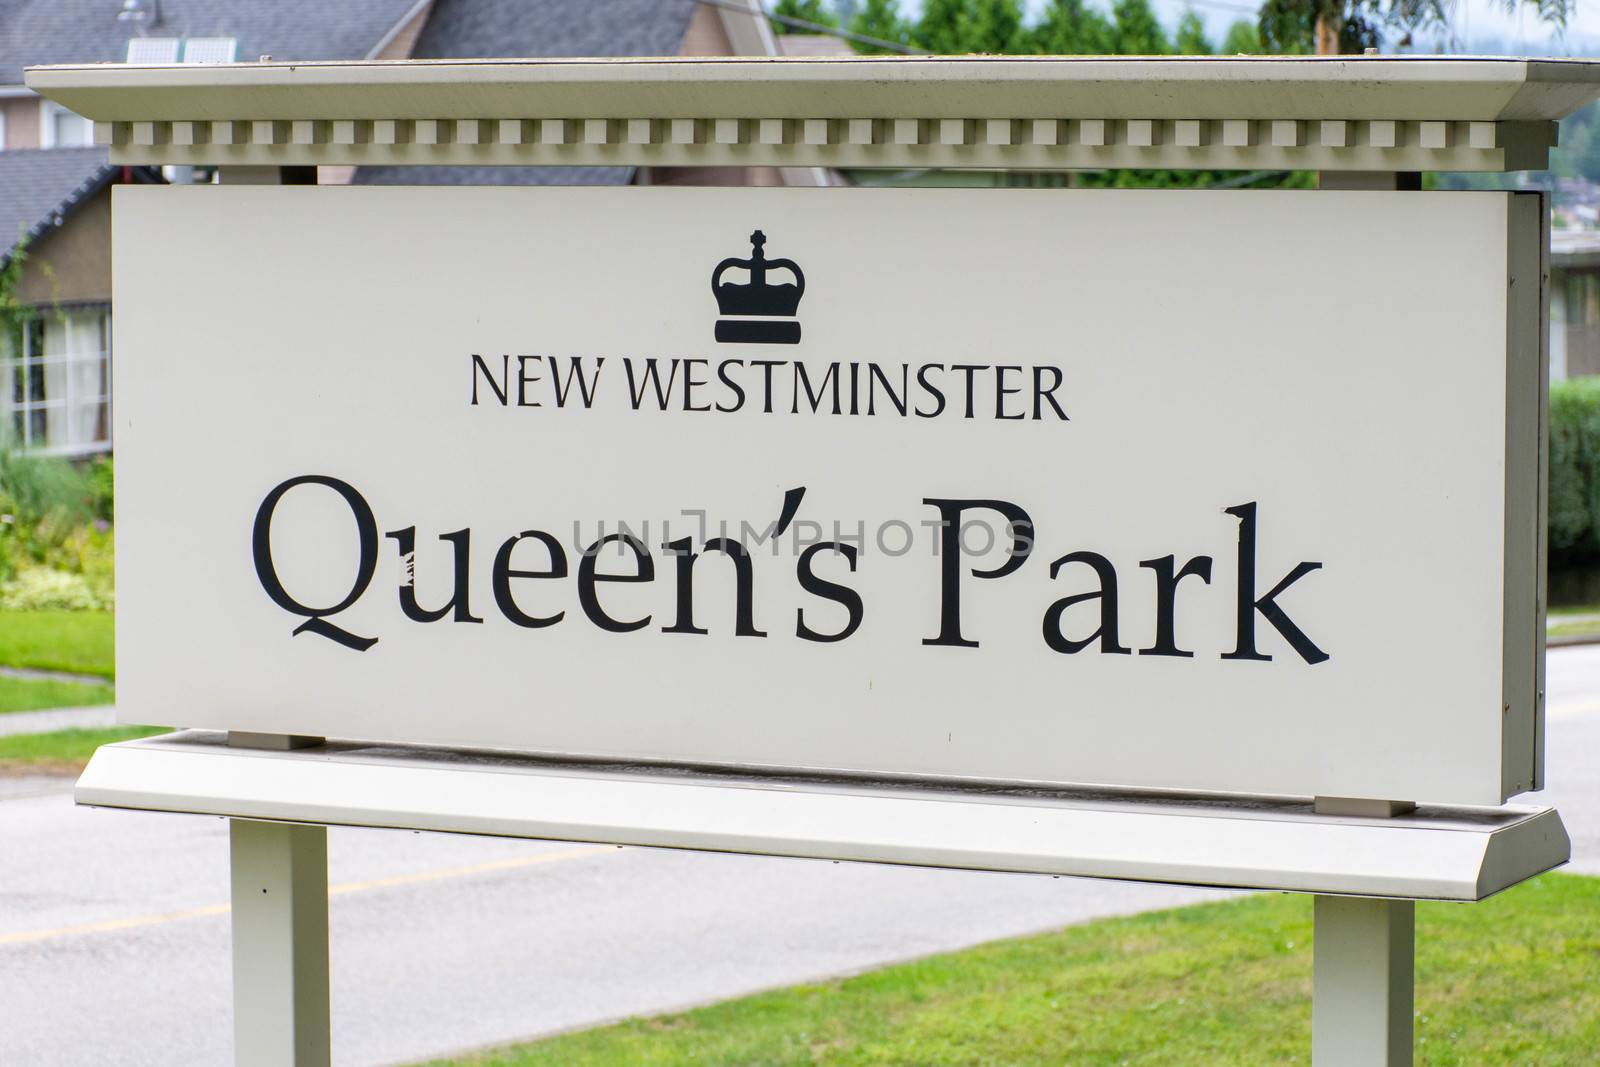 Queen's Park entrance sign in New Westminster, British Columbia, by kingmaphotos